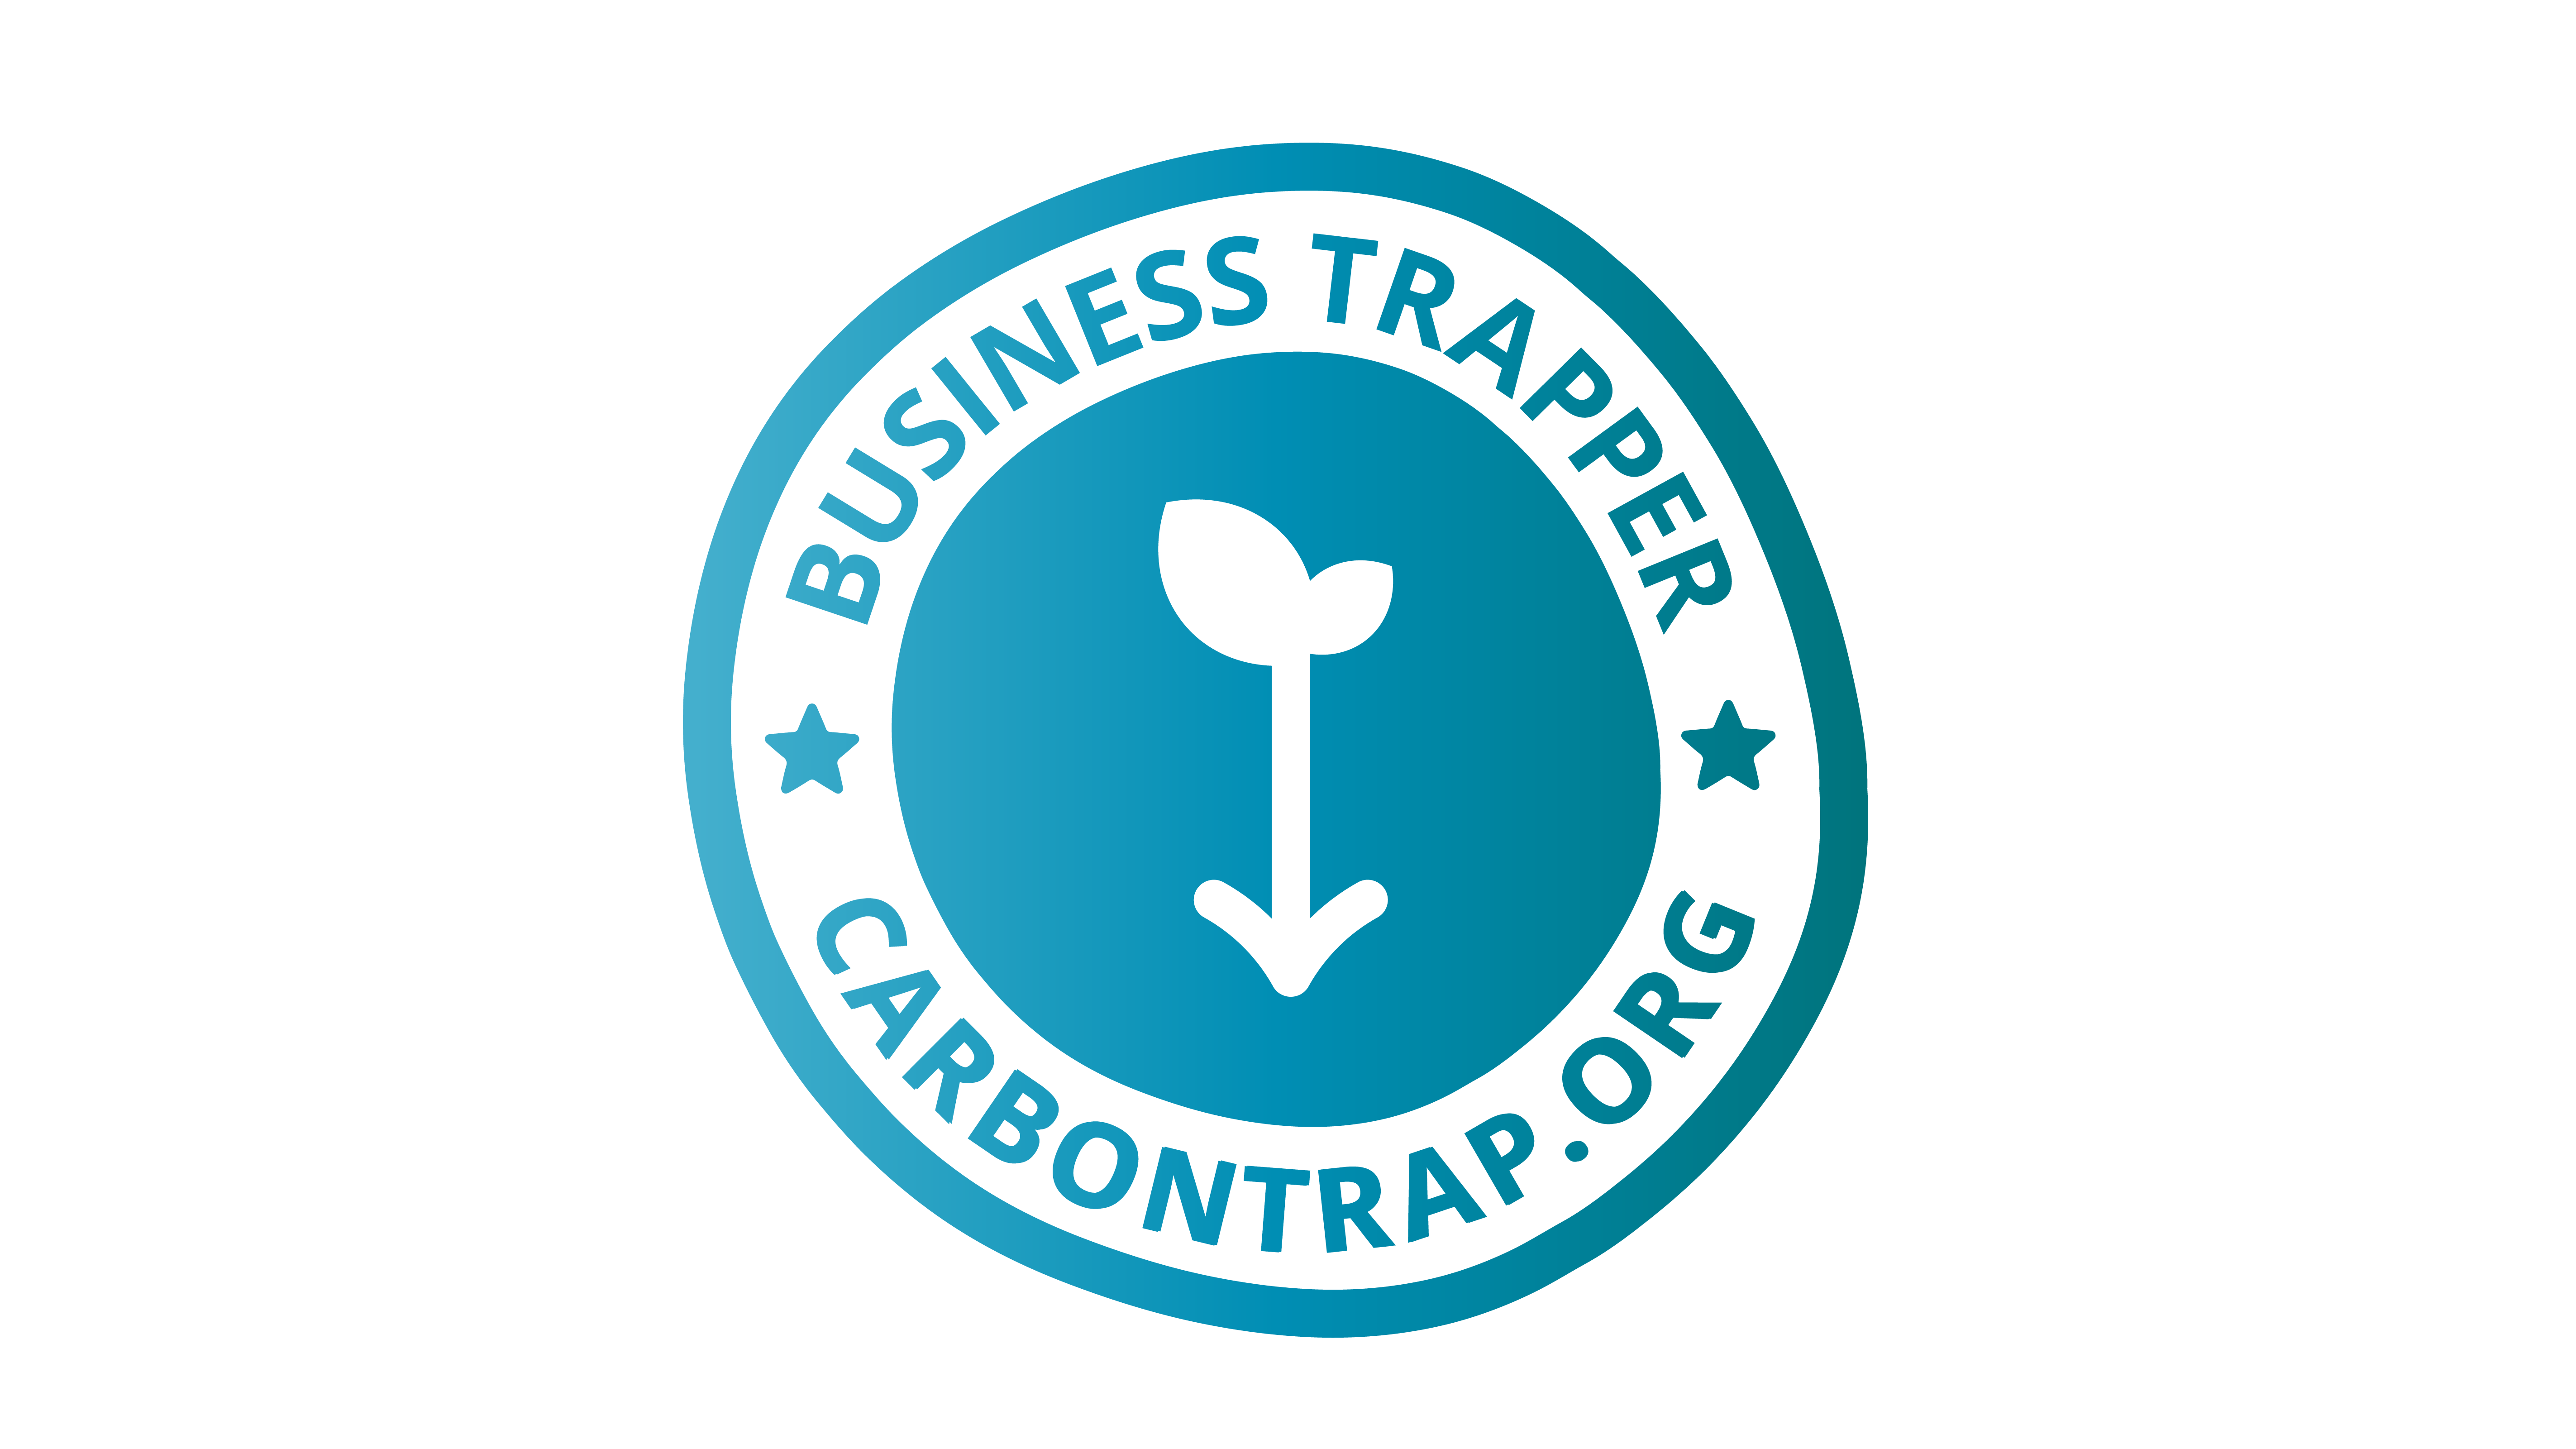 The Business Trapper logo from Carbon Trap